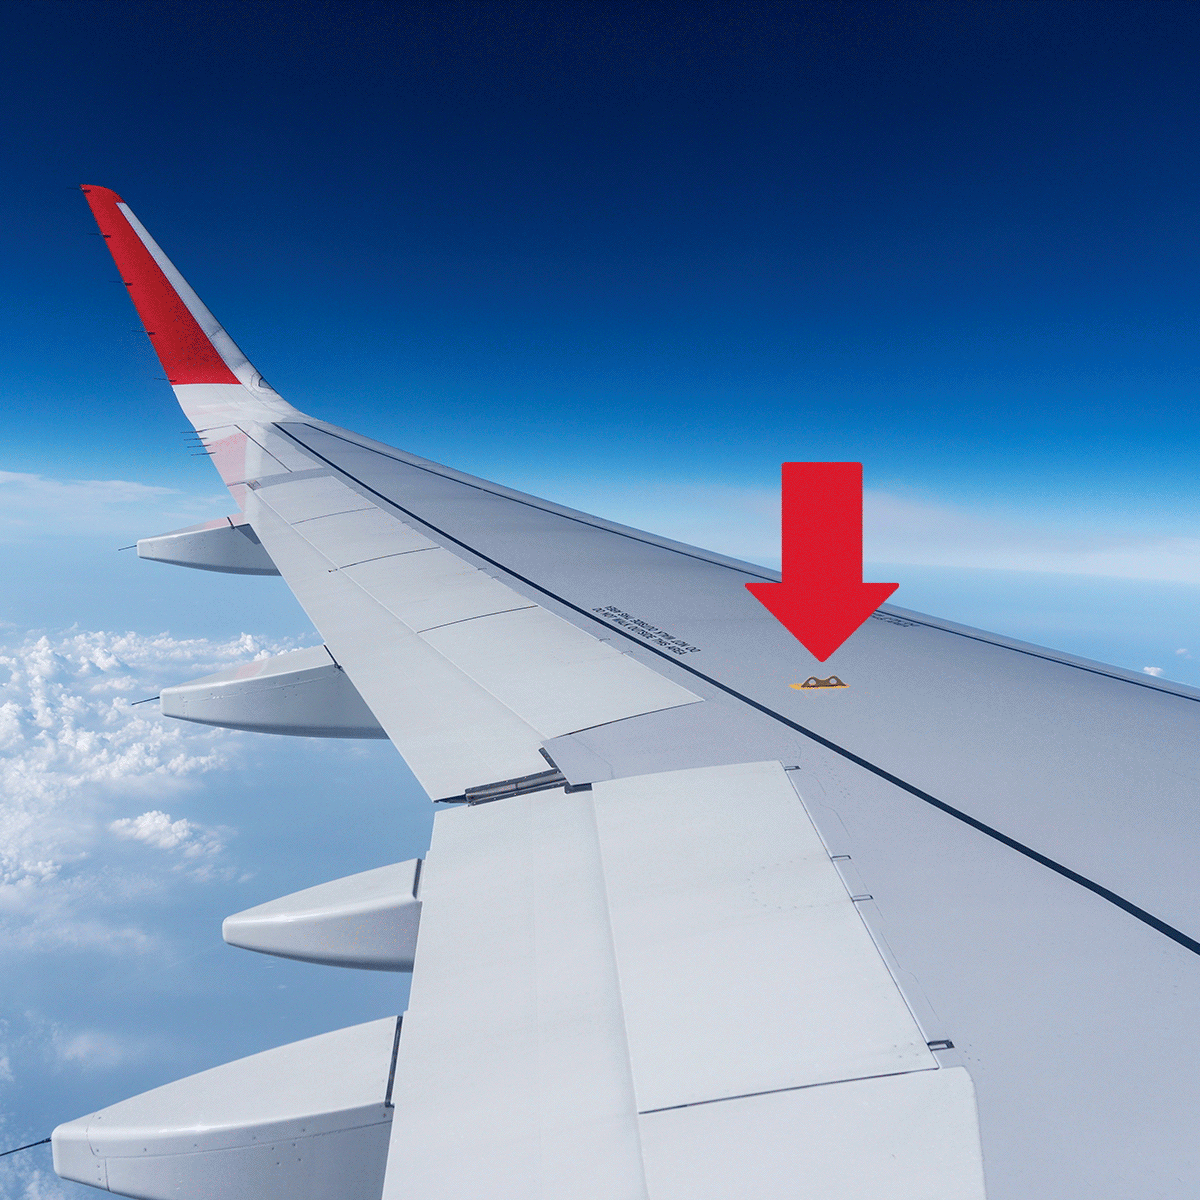 Red arrow pointing at yellow hooks on an airplane wing